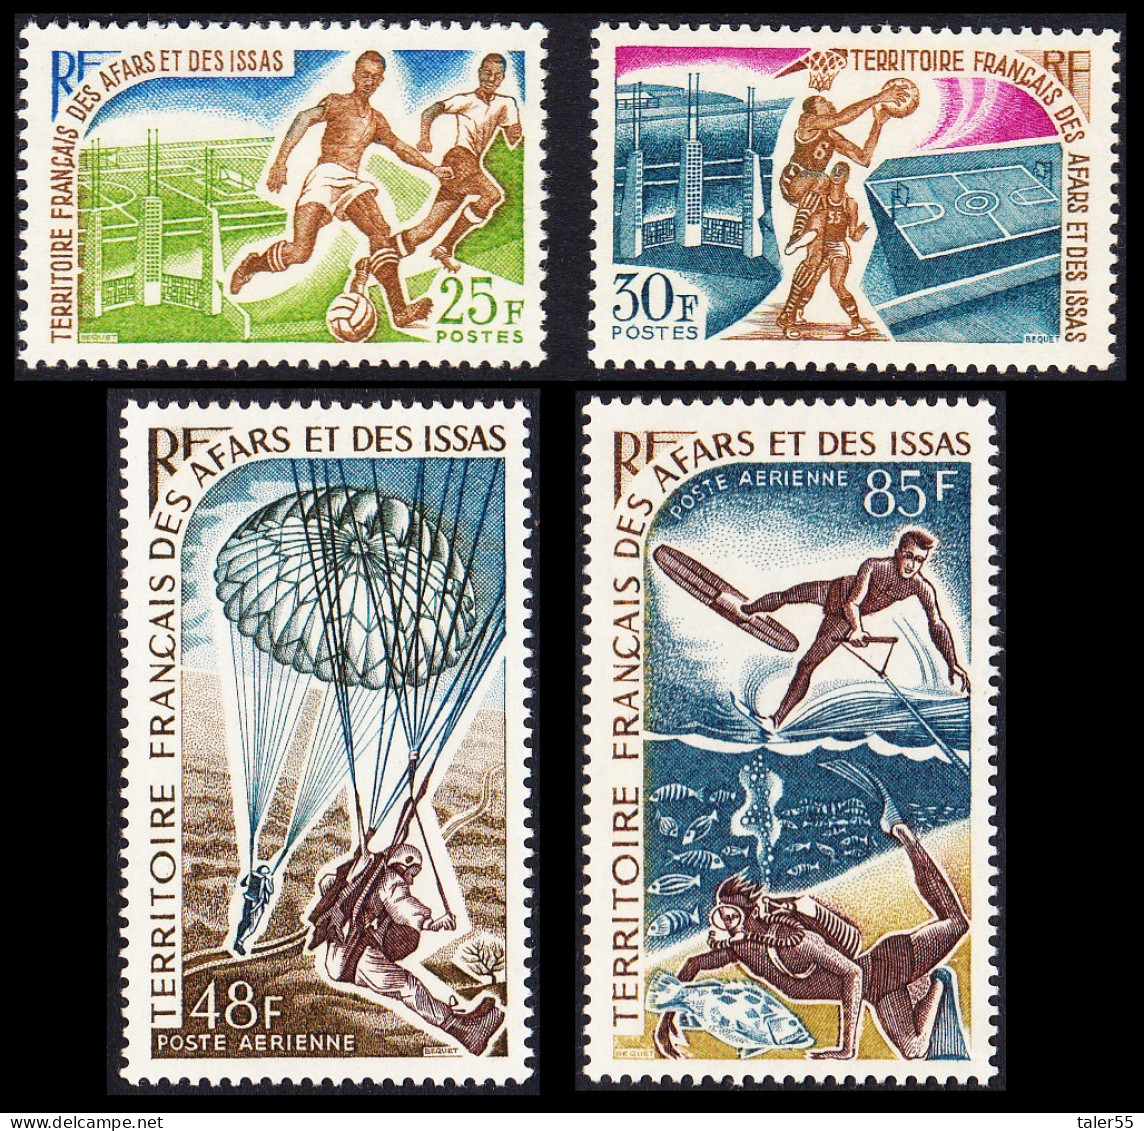 Afar And Issa Football Basketball Parachute Jumping Sports 4v 1967 MNH SG#510-513 MI#7-10 Sc#315-316+C51-52 - Unused Stamps